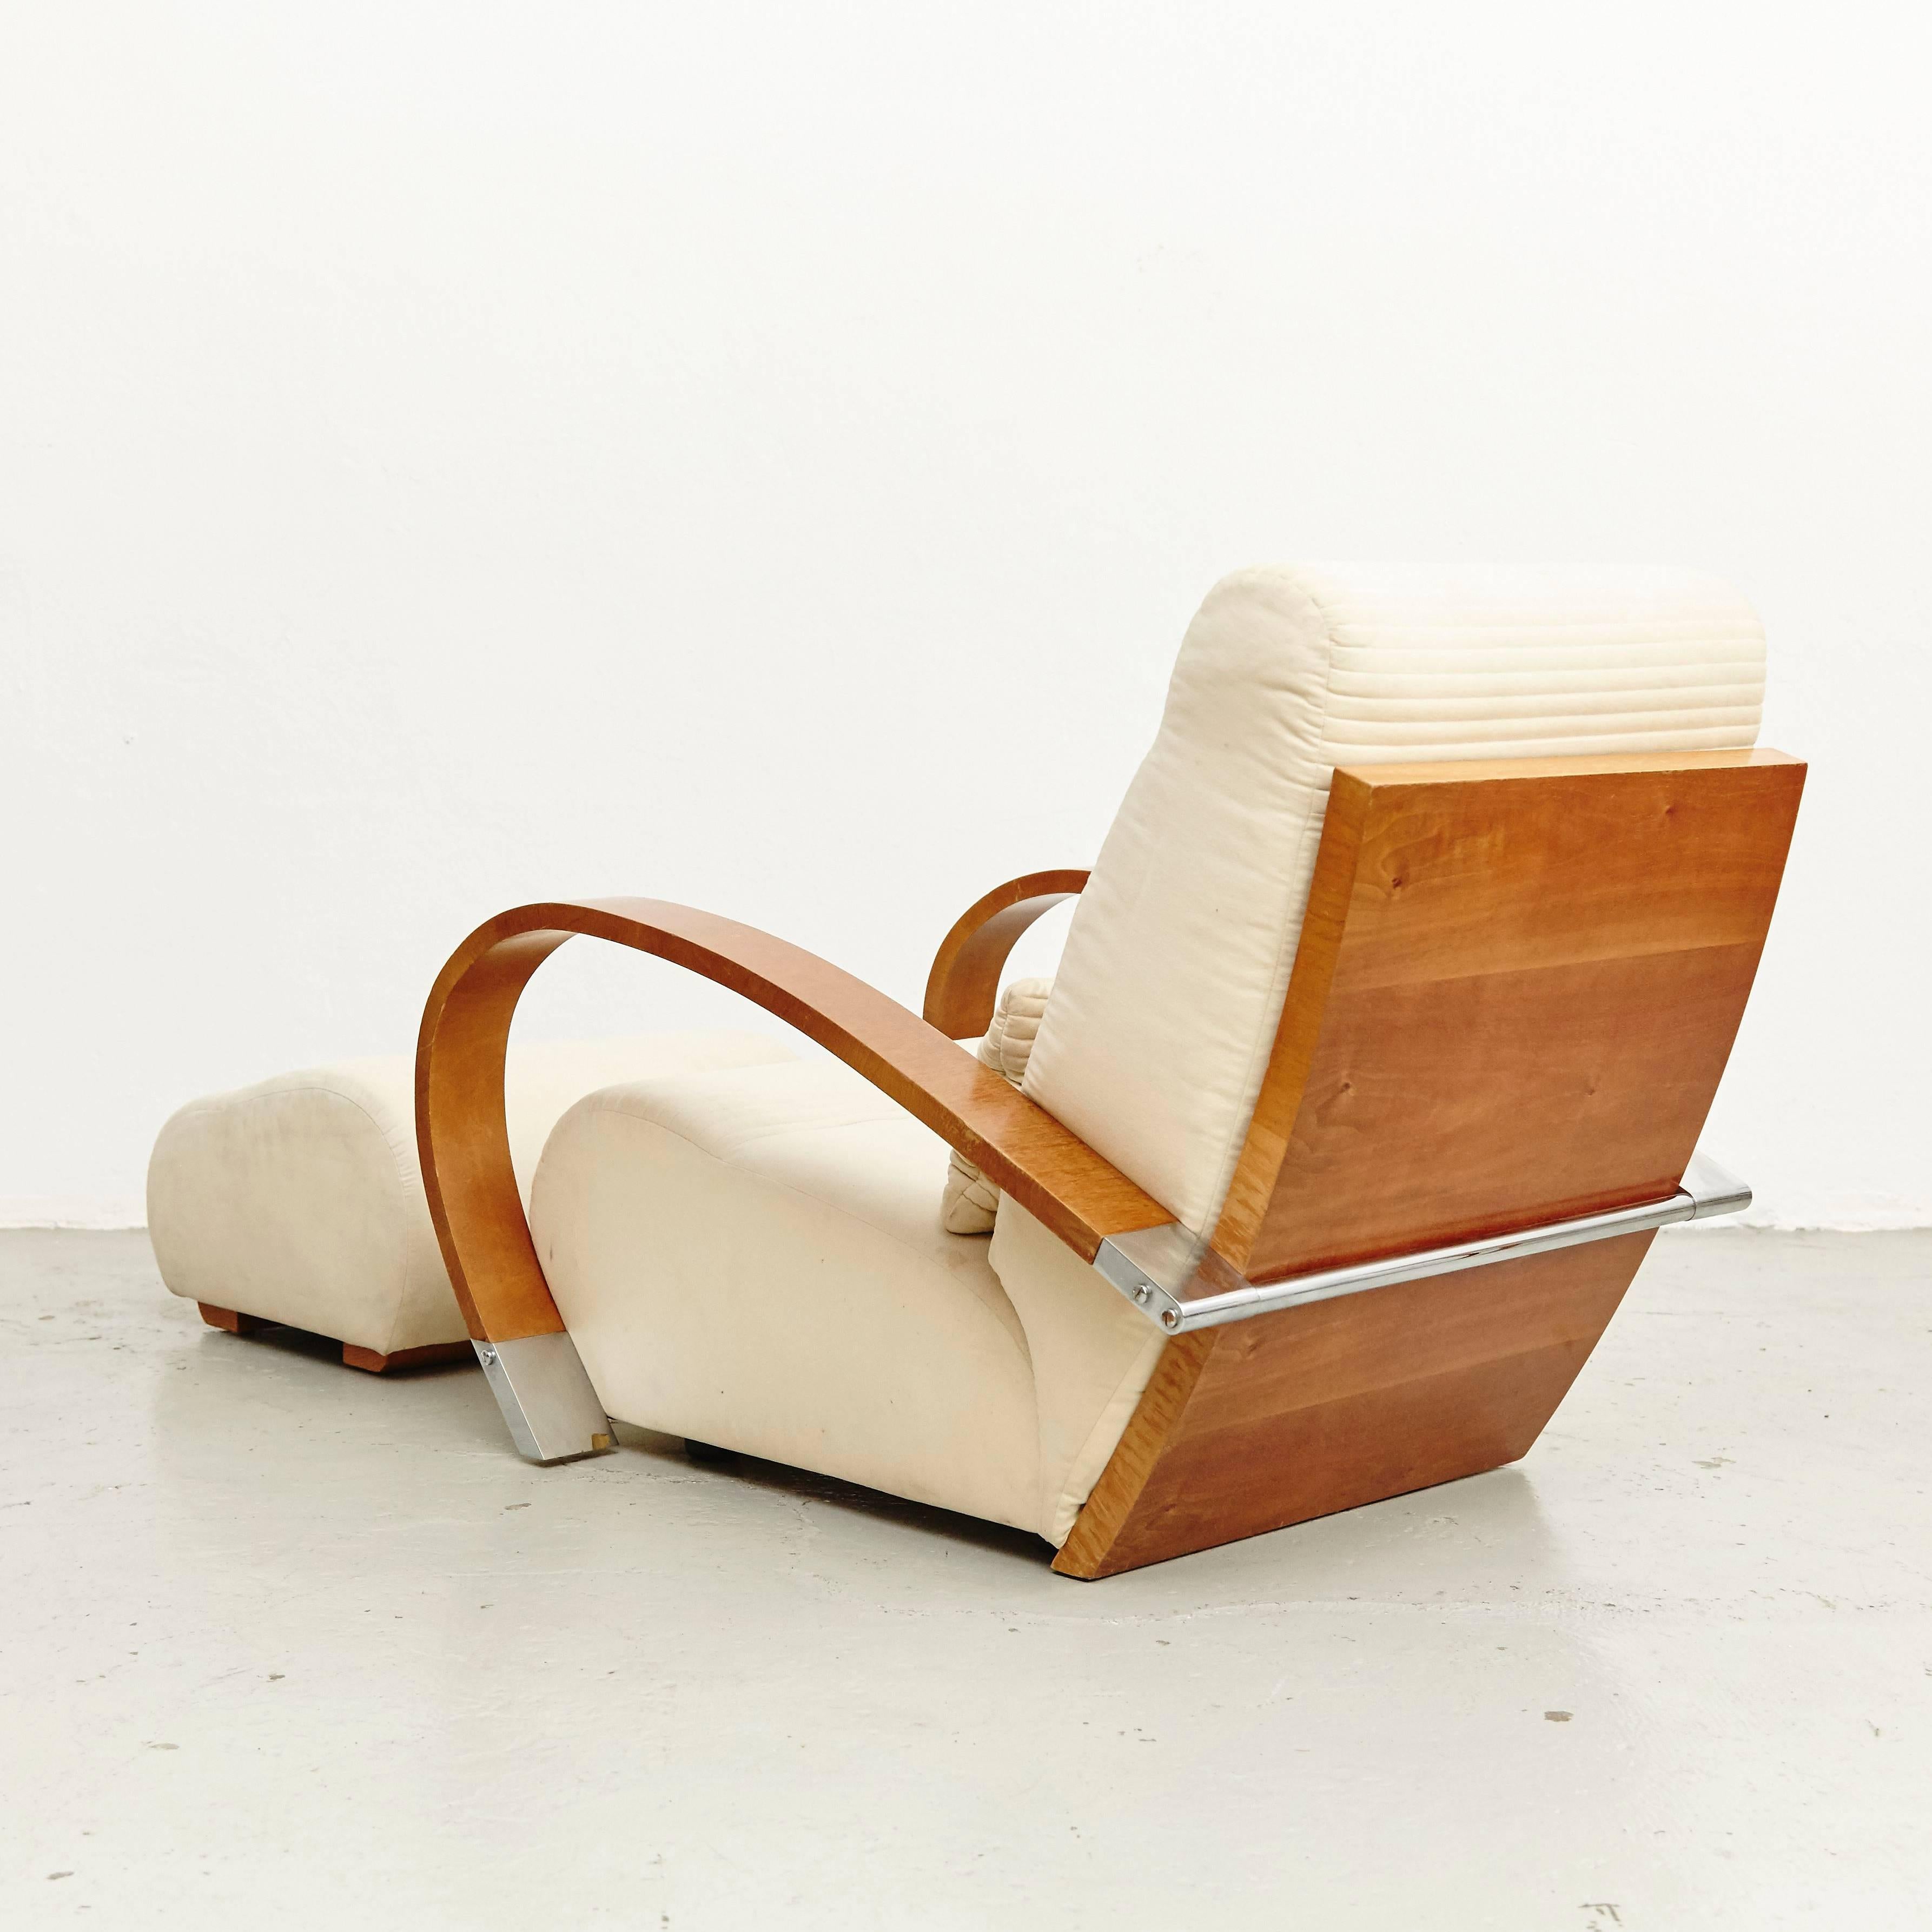 Armchair and footrest designed by Jaime Tresserra, circa 1987.
Manufactured by Tresserra Design (Spain), circa 1987.
Made of walnut wood and velveteen upholstery.

In good original condition, with minor wear consistent with age and use,